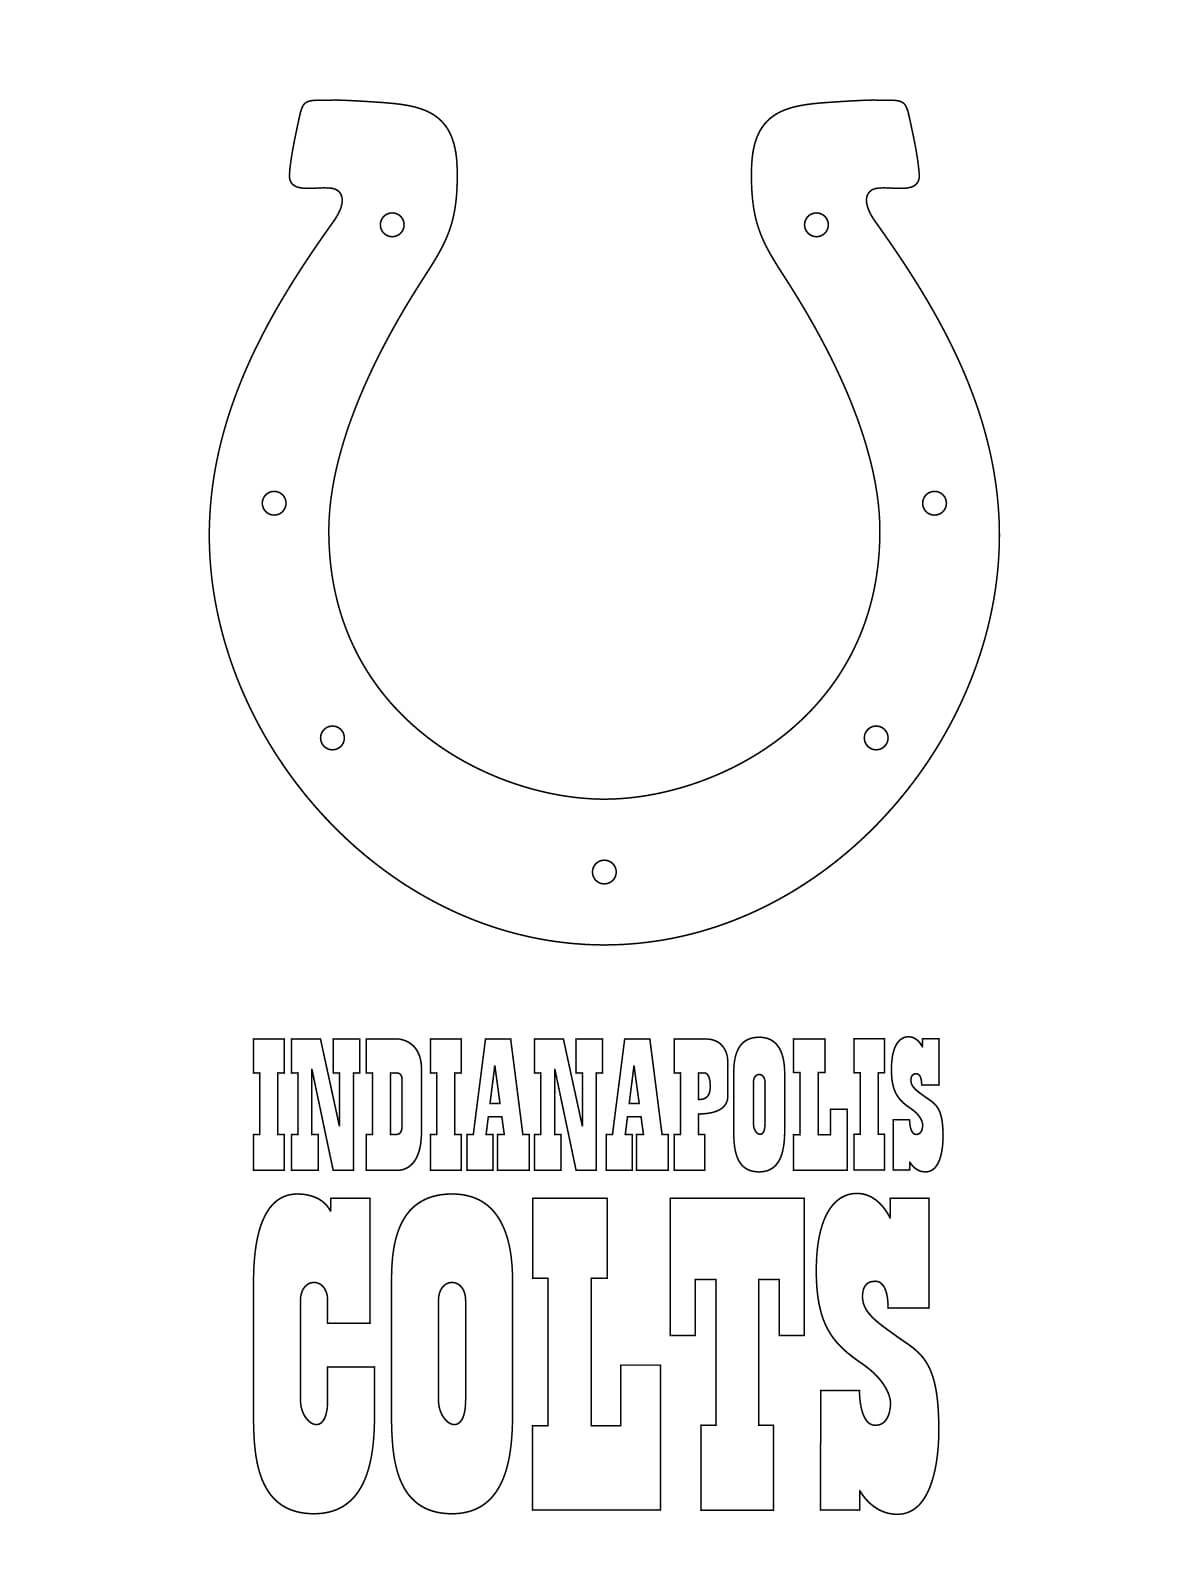 indianapolis colts coloring pages